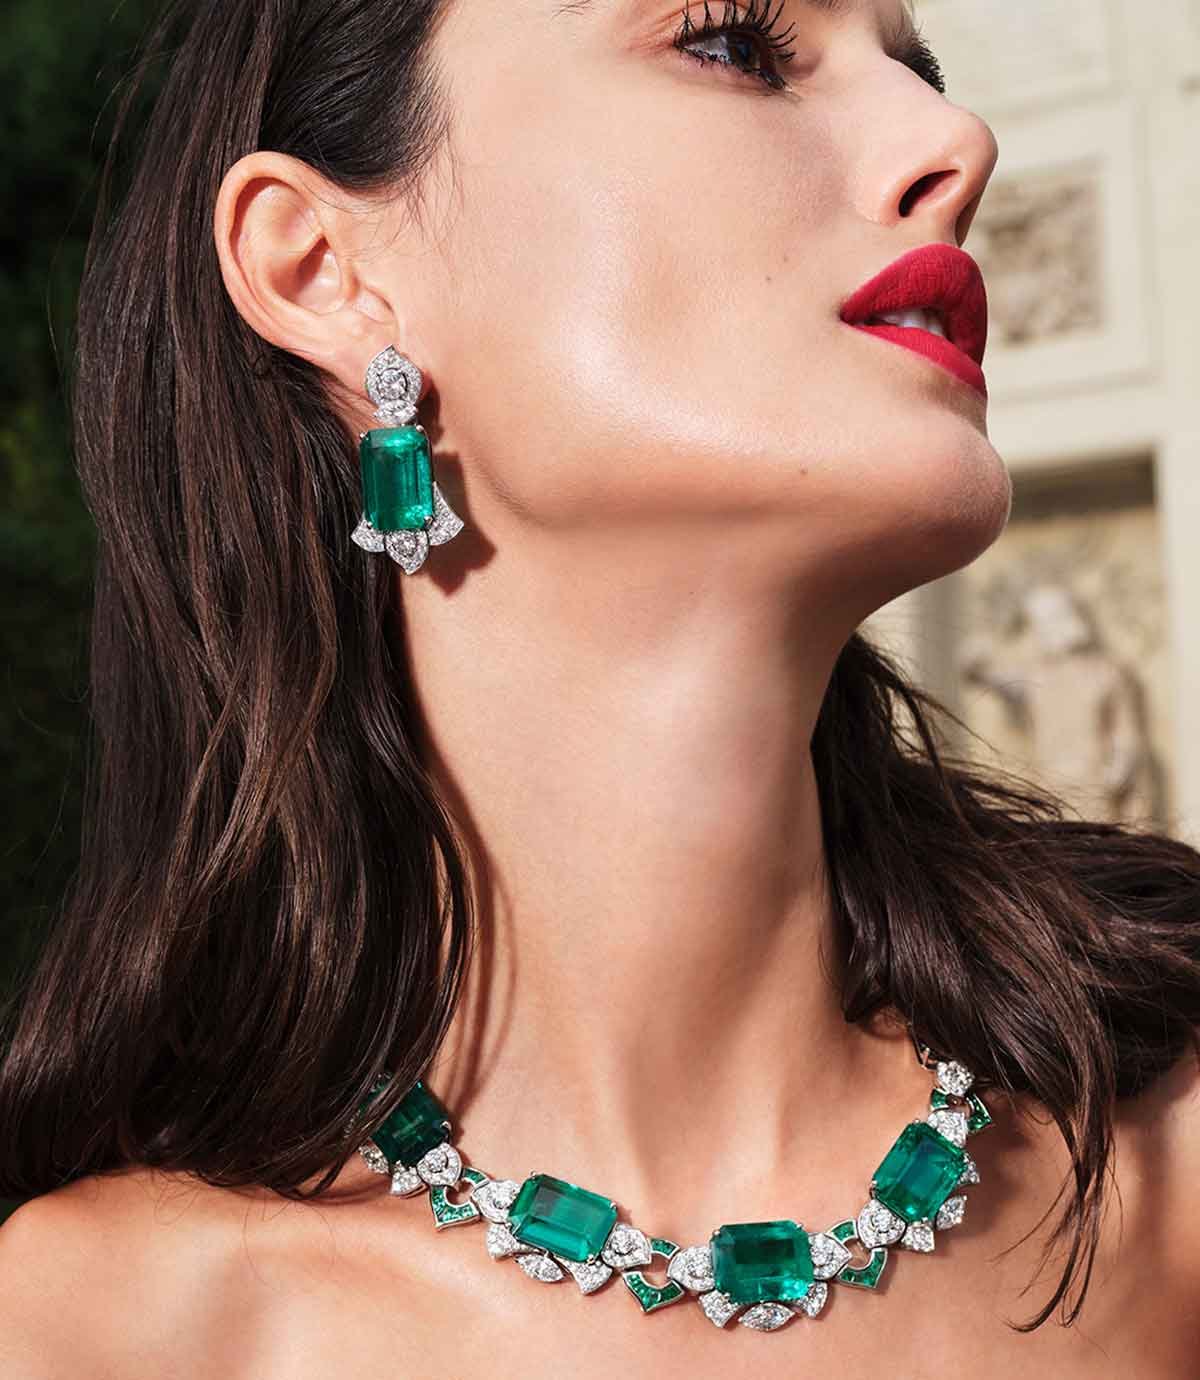 Bvlgari unveils Magnifica, the new high jewelry collection - LVMH